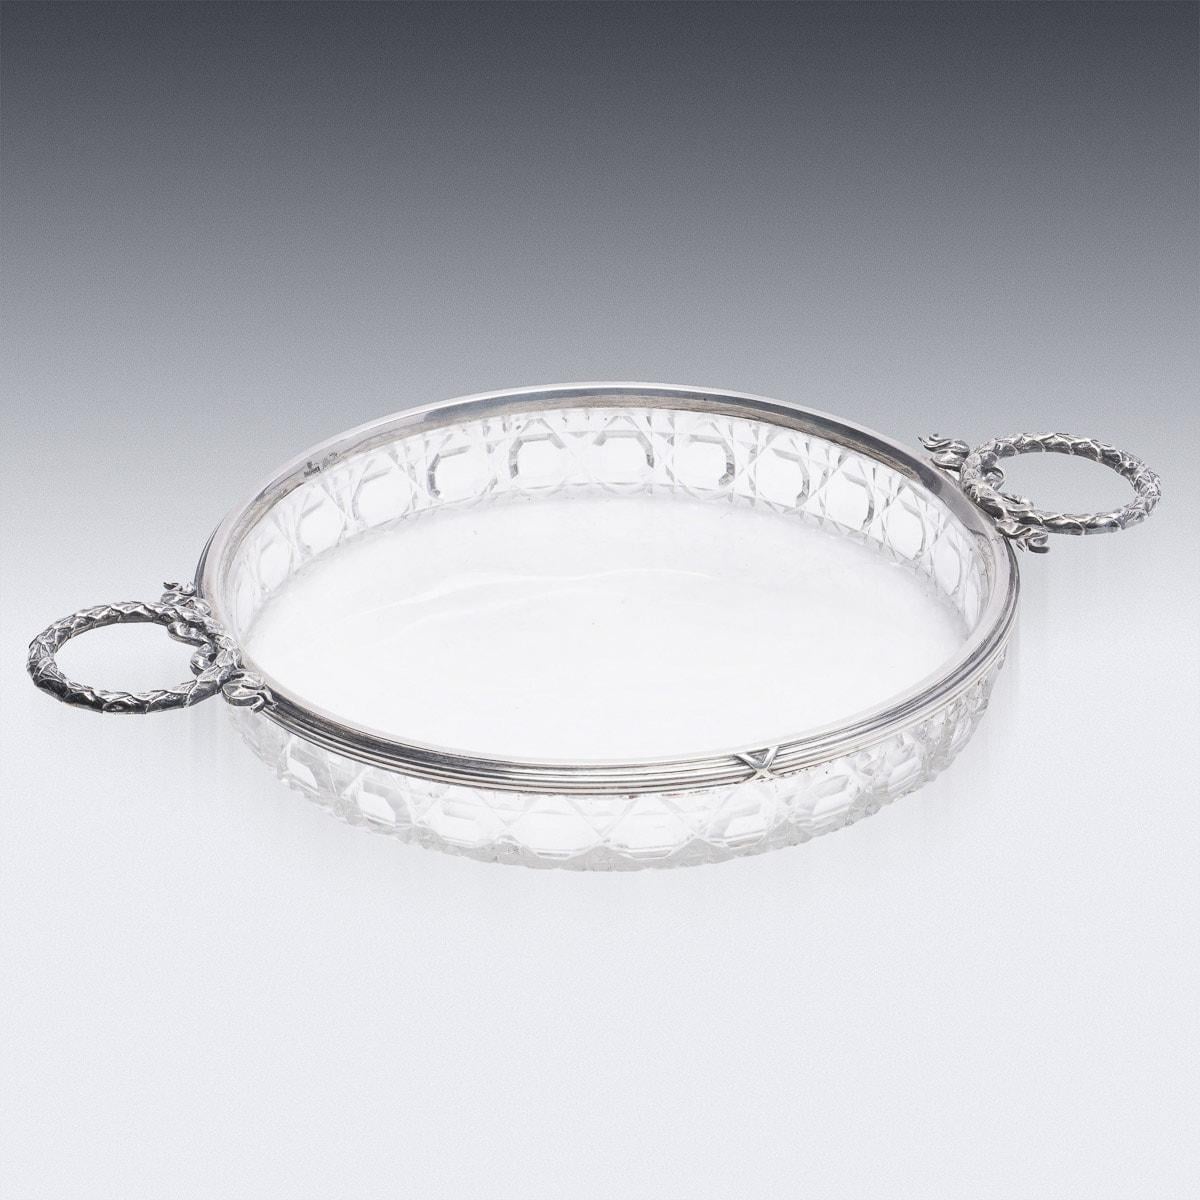 Antique early-20th century Russian Empire style Faberge solid silver & cut glass dish, round shaped and mounted with wreath twin handles, embellished with interwoven boarders, reeds along the rim, set with a Russian cut glass bowl. Hallmarked